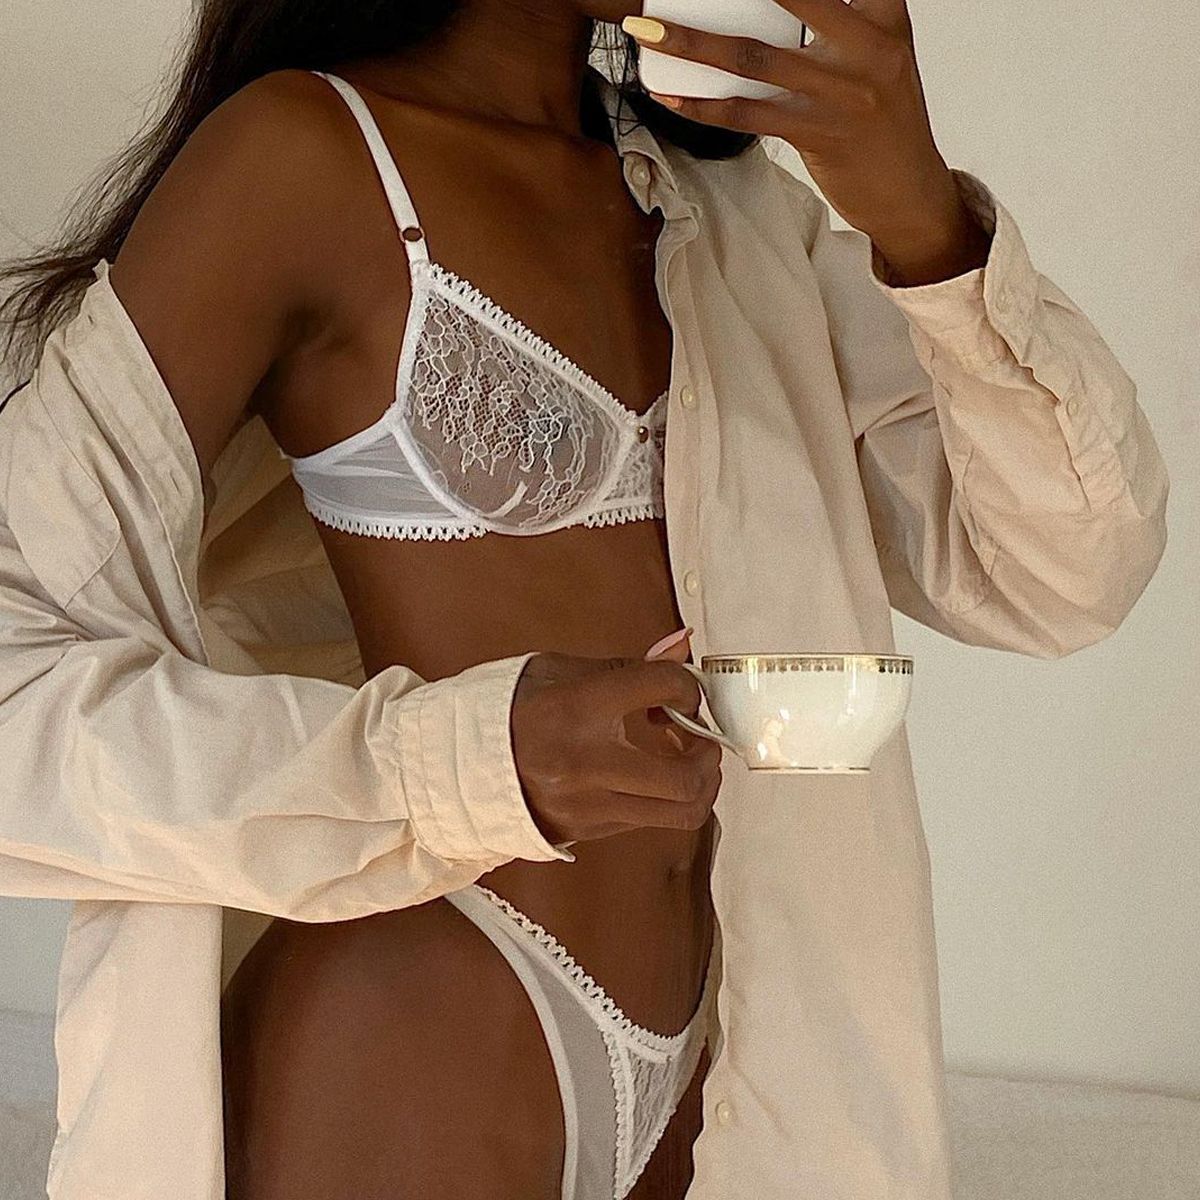 12 Cheap Lingerie Brands You'll Love and Can Shop Now